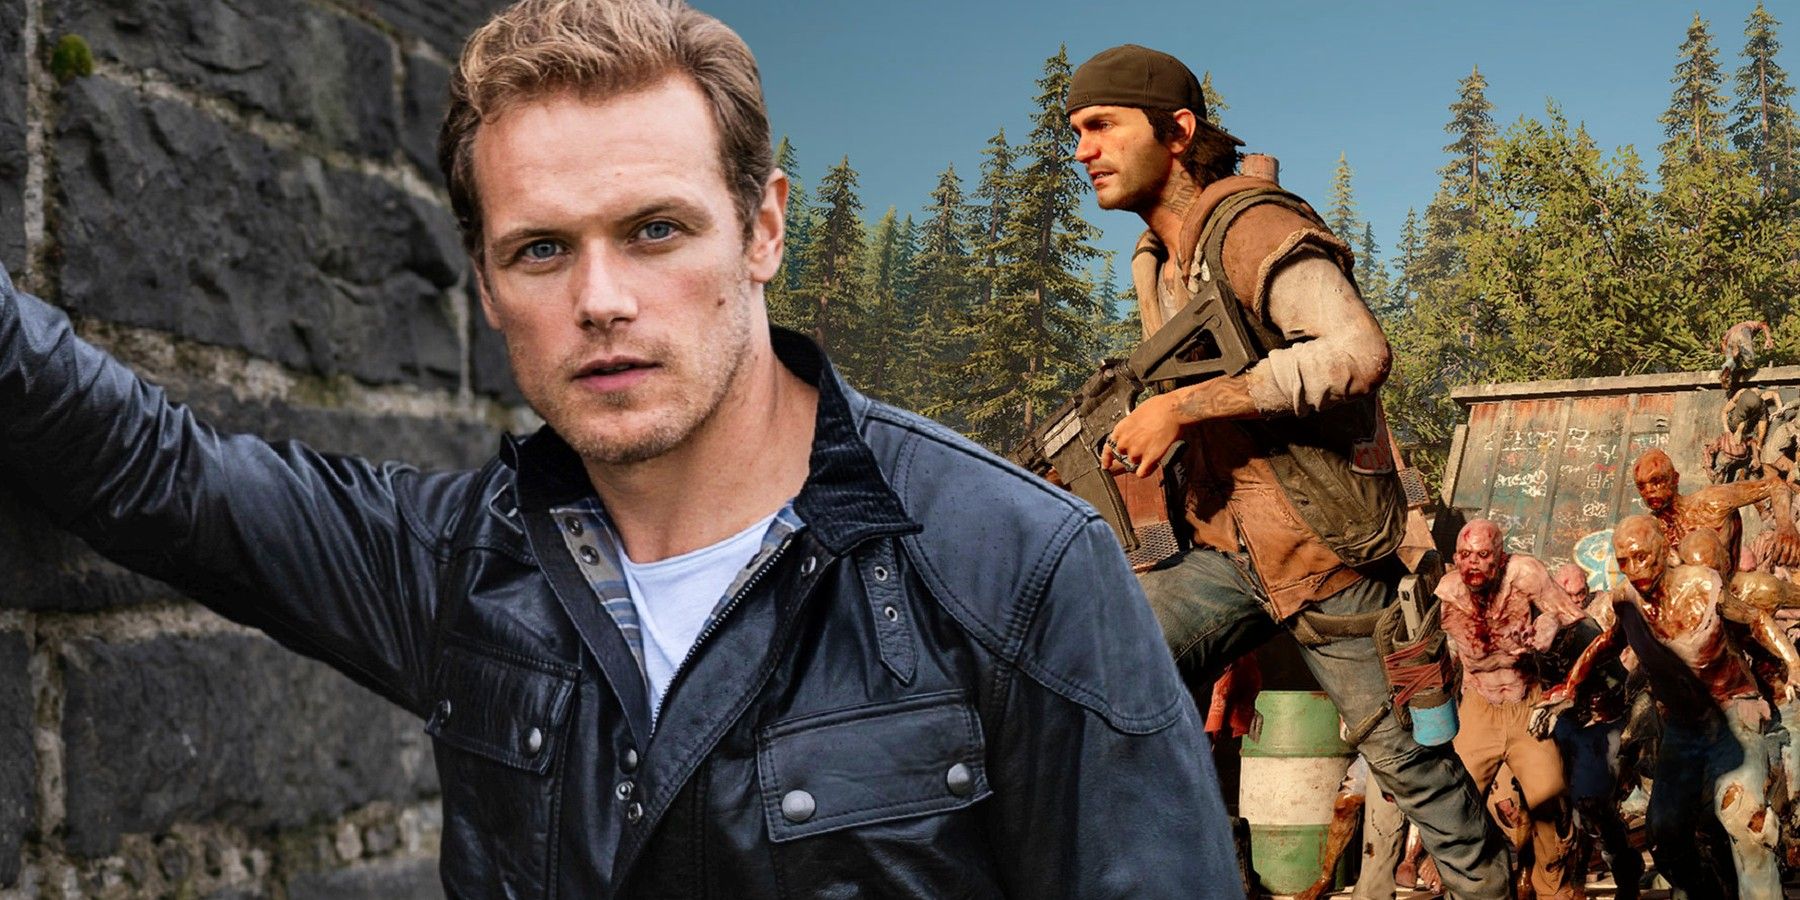 Days Gone Movie Will Adapt Zombie Game With Outlander Star Sam Heughan